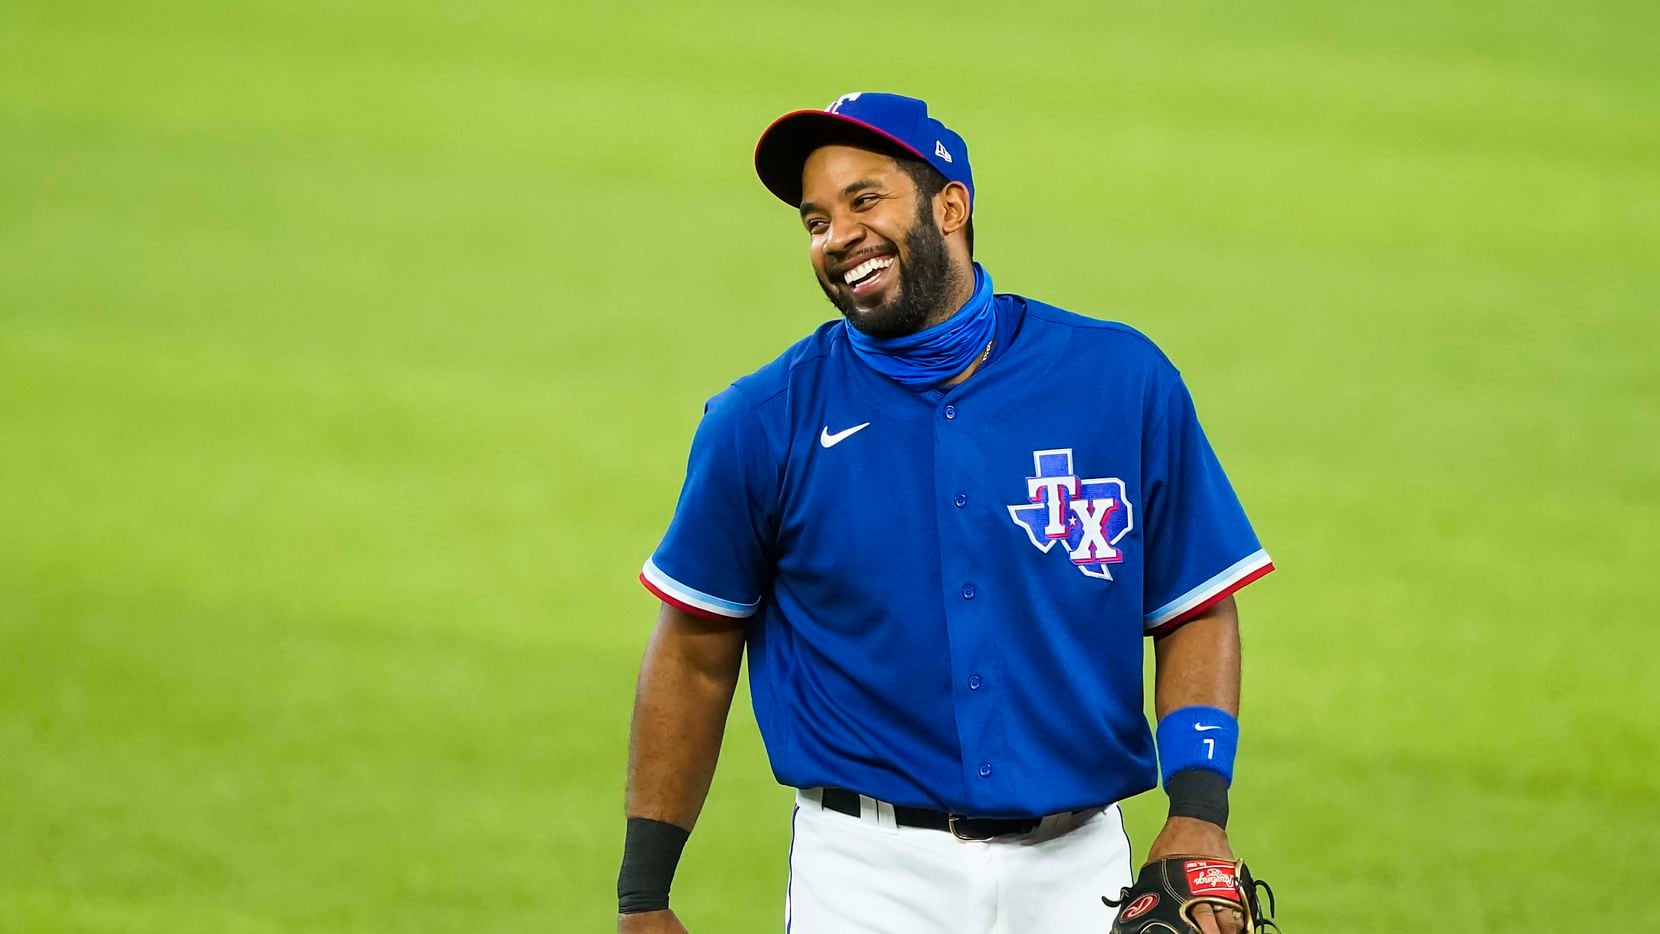 Elvis Andrus shows his value in 2-0 White Sox win – NBC Sports Chicago